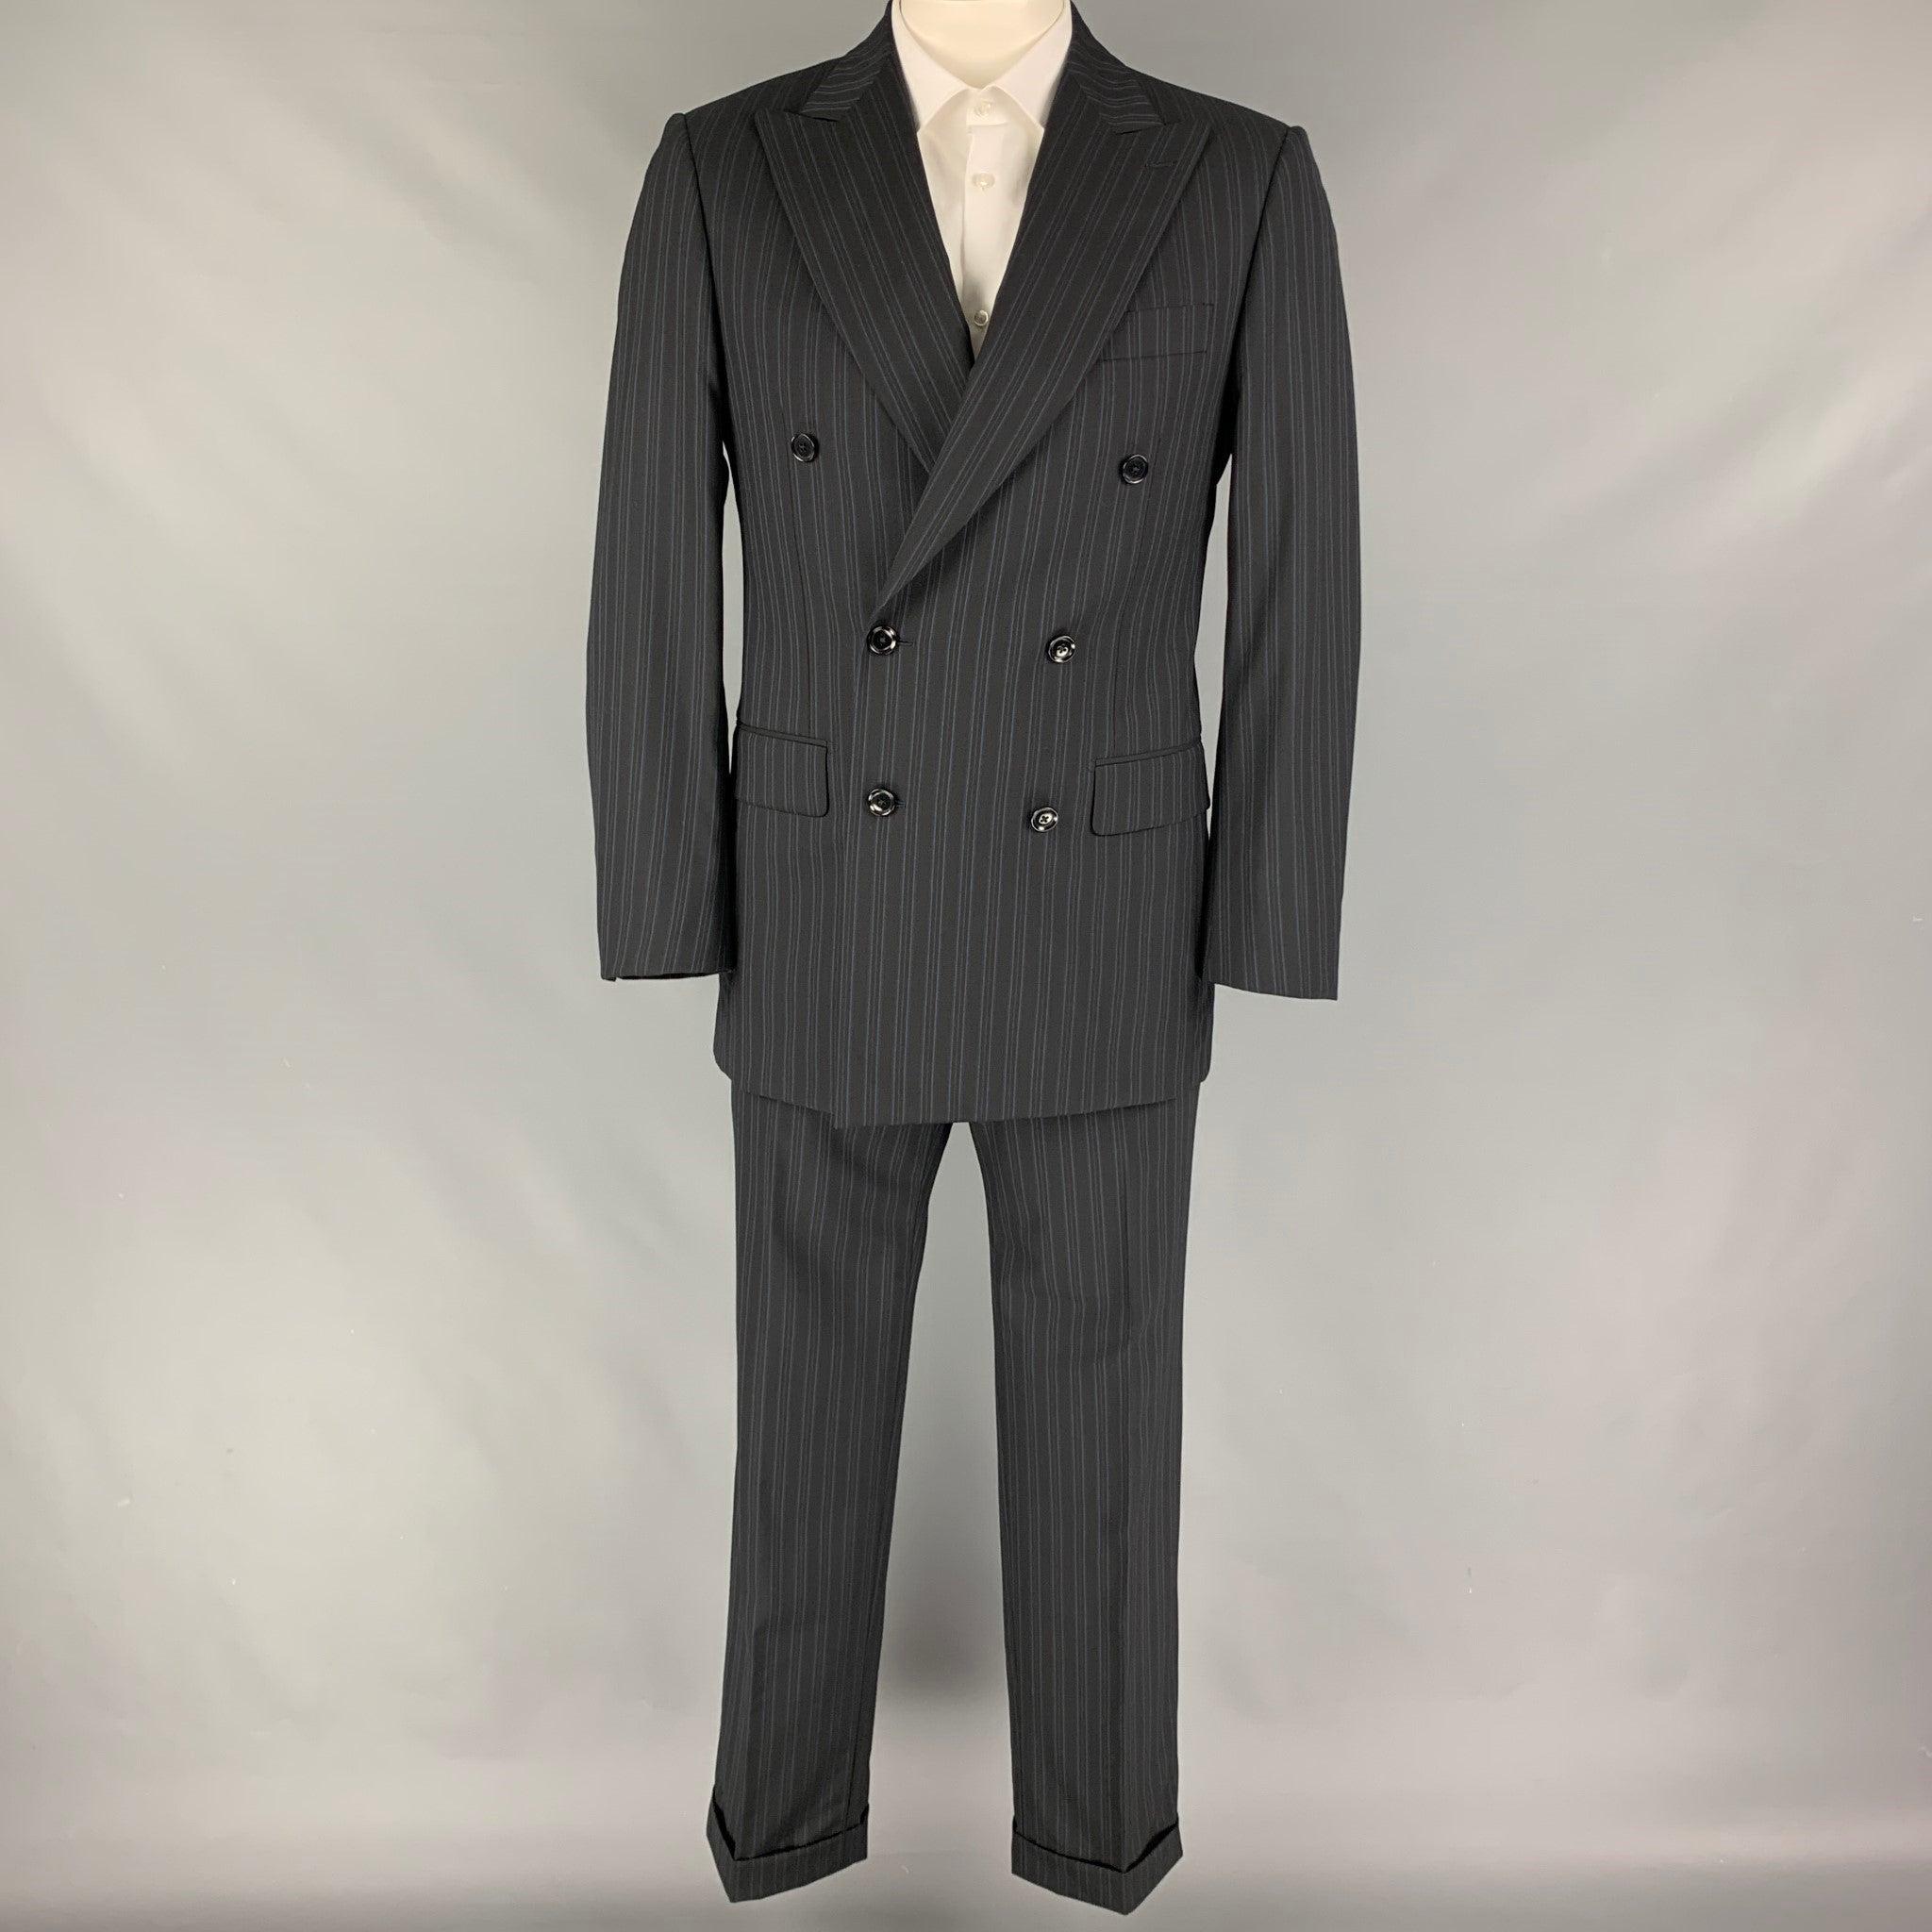 PAL ZILERI
suit comes in a black & blue stripe wool with a full liner and includes a double breasted sport coat with a peak lapel and matching cuffed flat front trousers. Made in Italy. Very Good Pre-Owned Condition. 

Marked:   50 

Measurements: 
